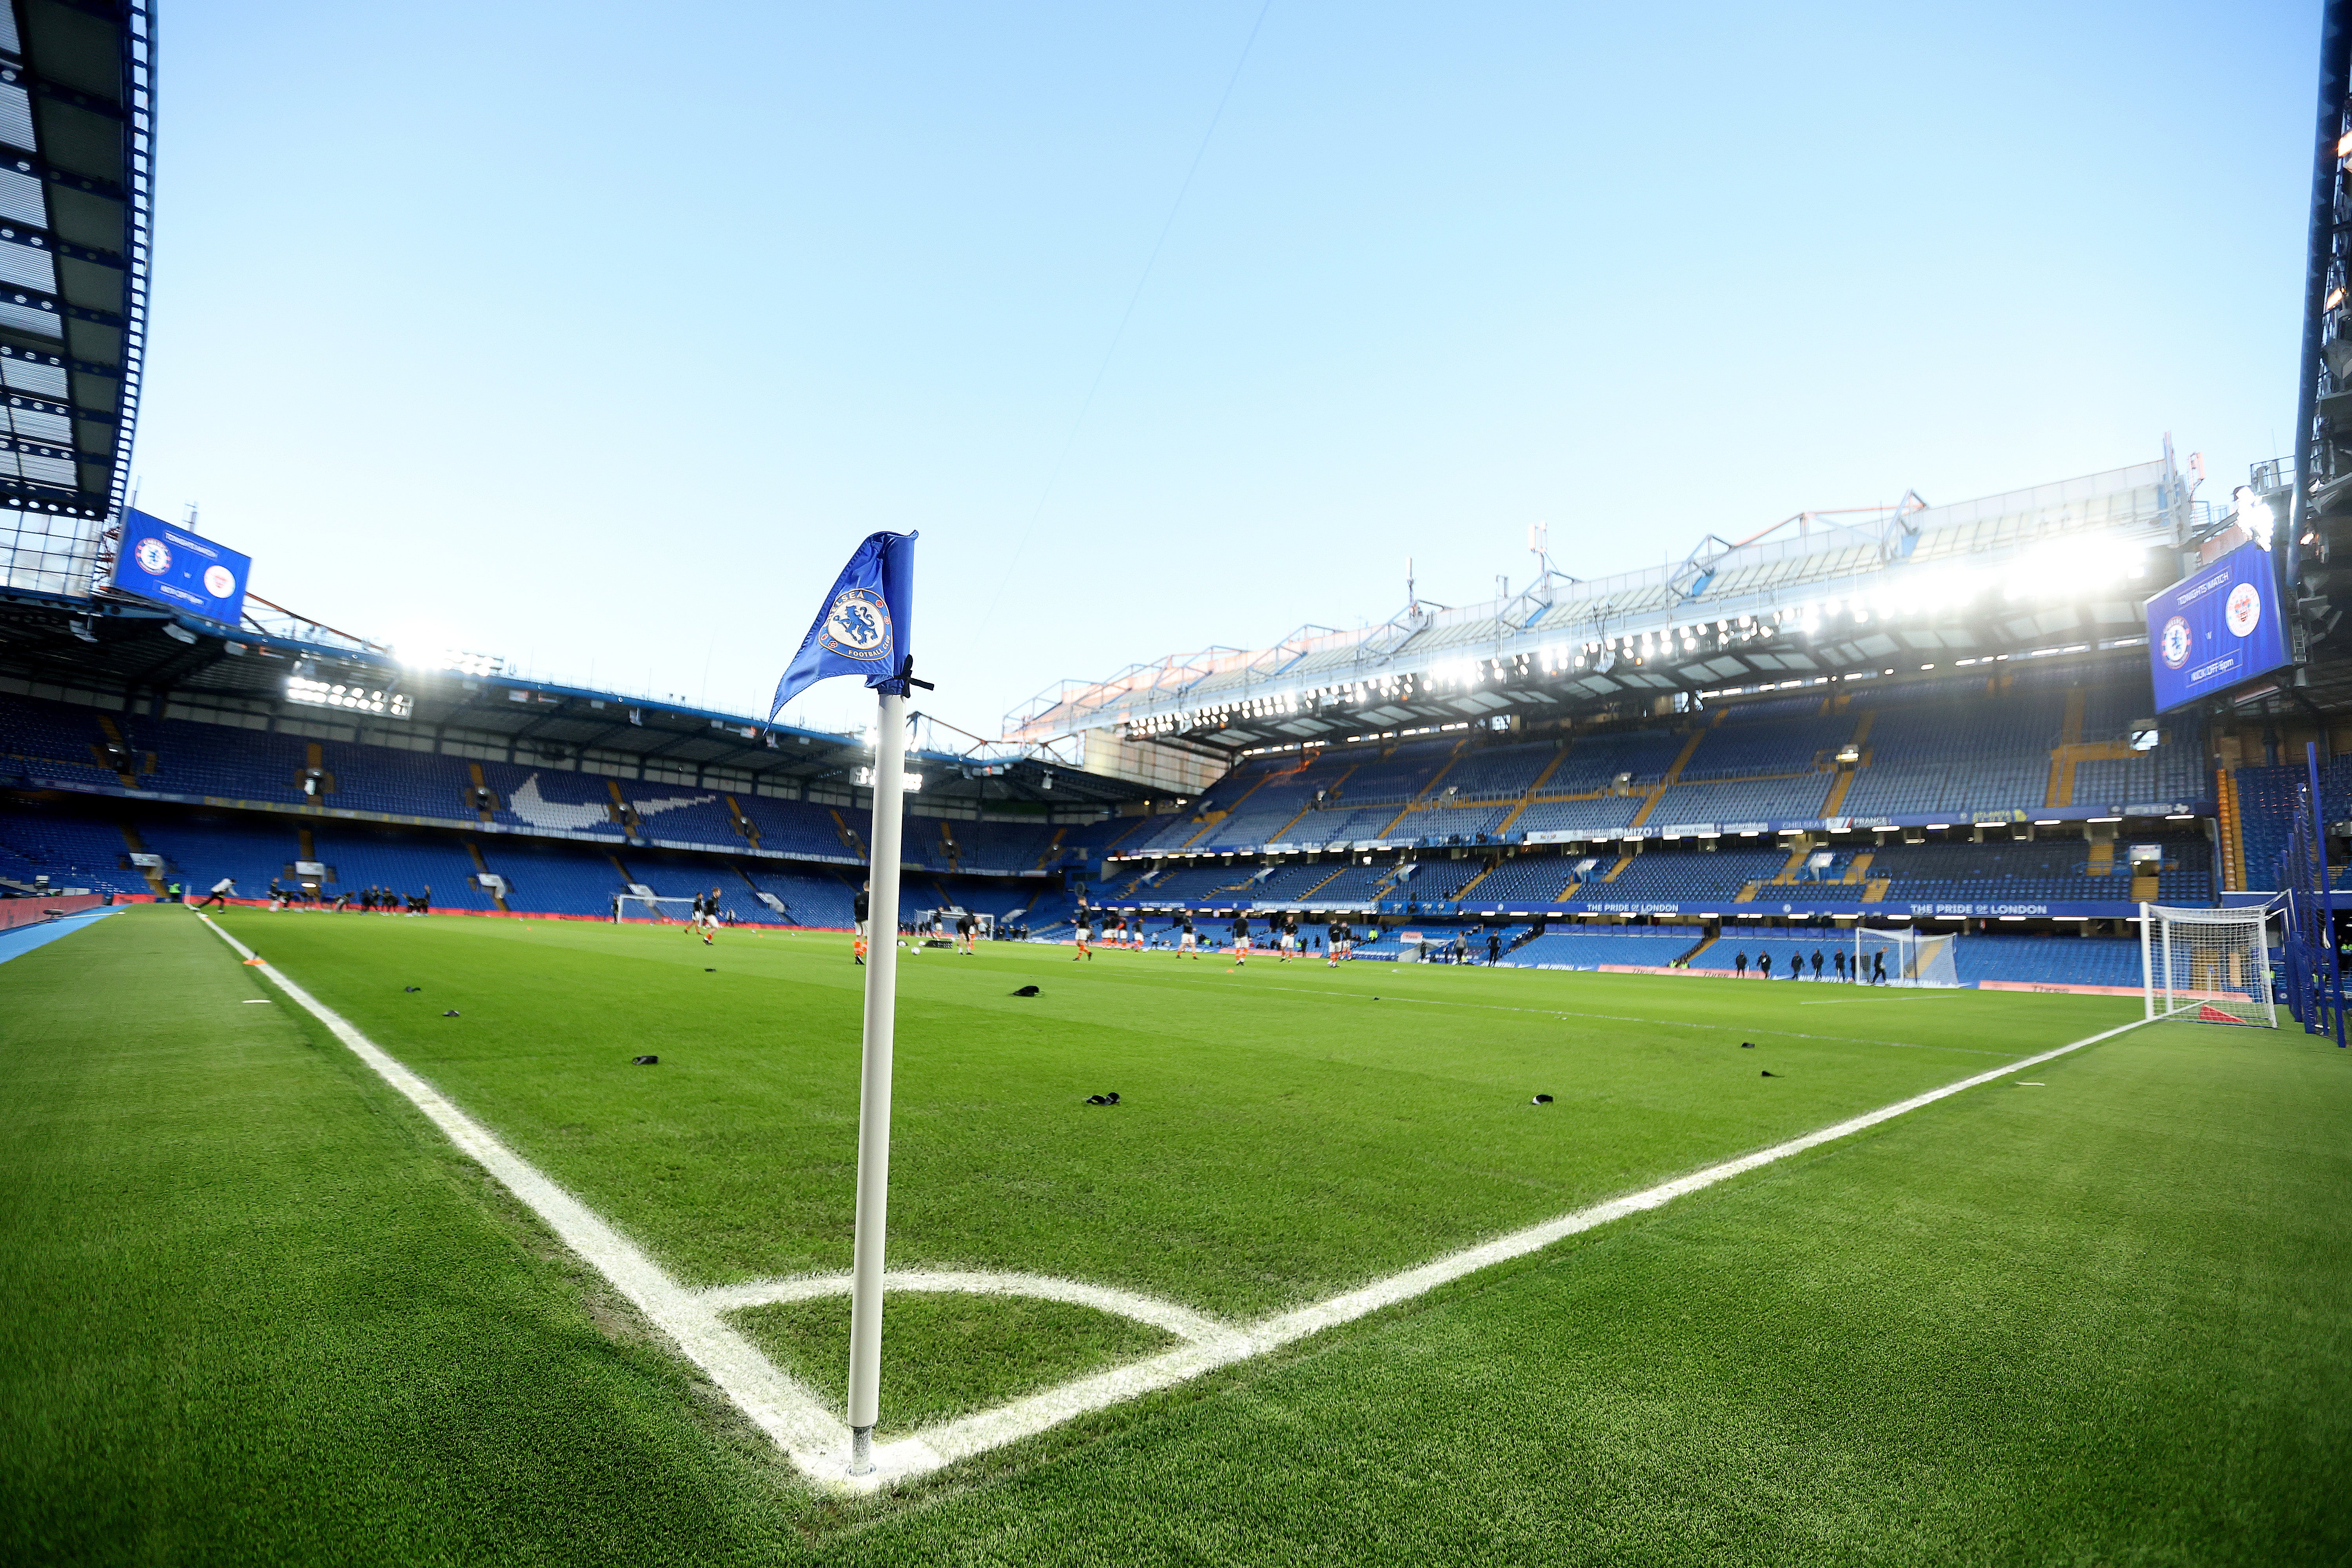 Chelsea withdrew their request to the FA just hours after submitting the proposal